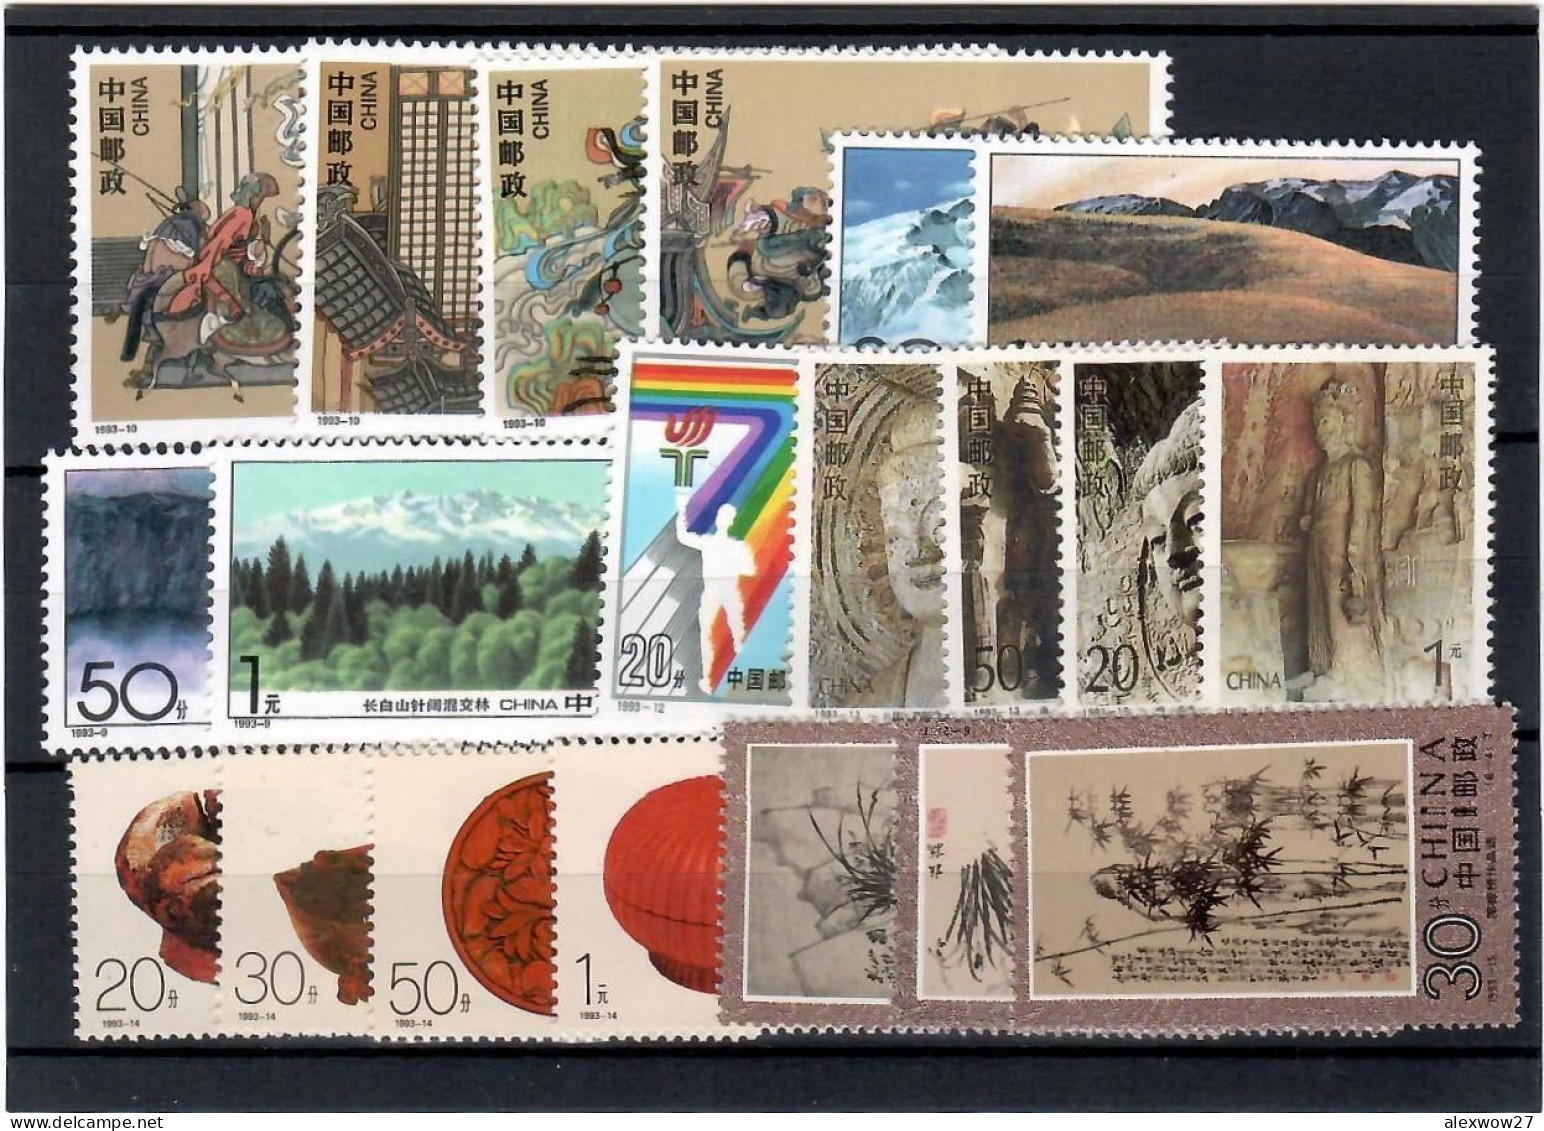 Cina / China  1993 Set/ YEARS  Complete ** MNH  / VF - Années Complètes